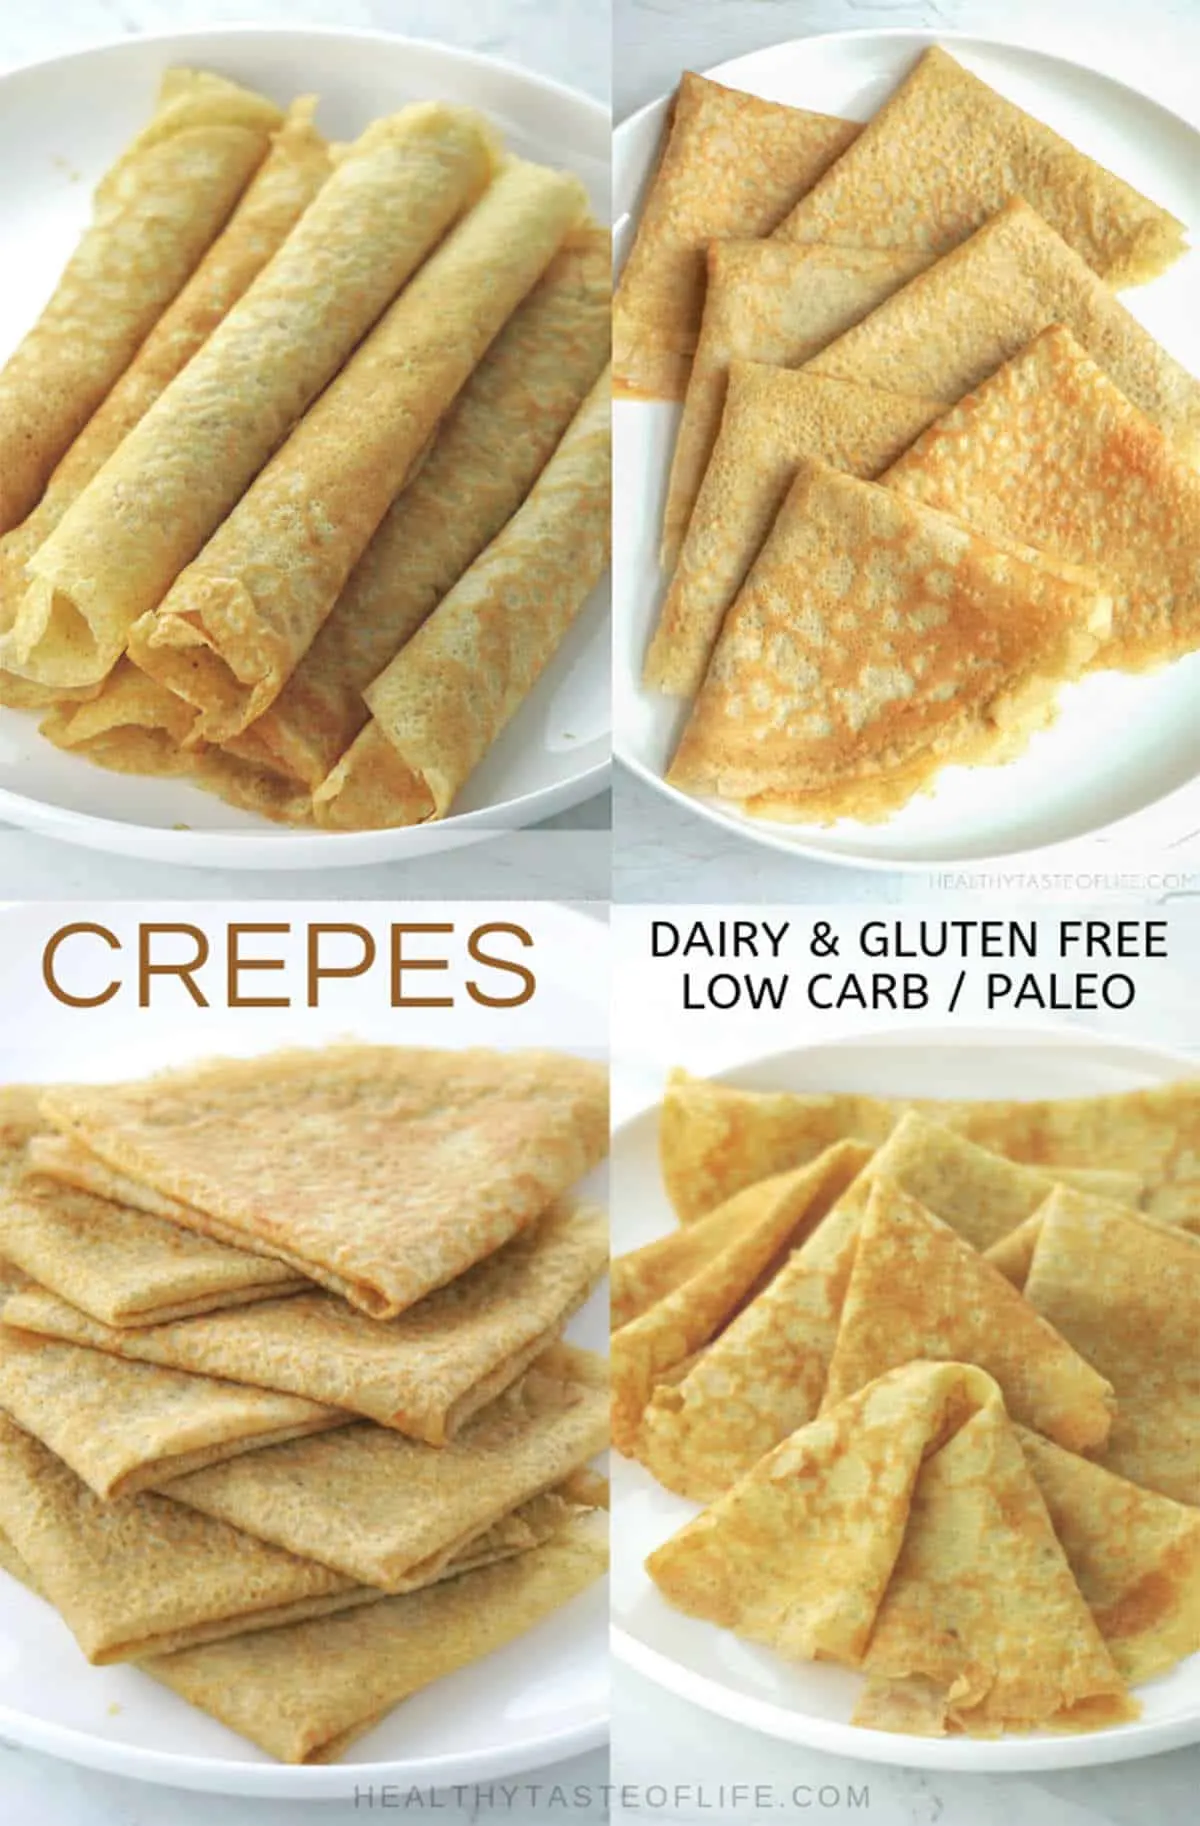 Gluten Free Recipes (and Dairy Free), Non-Toxic Living